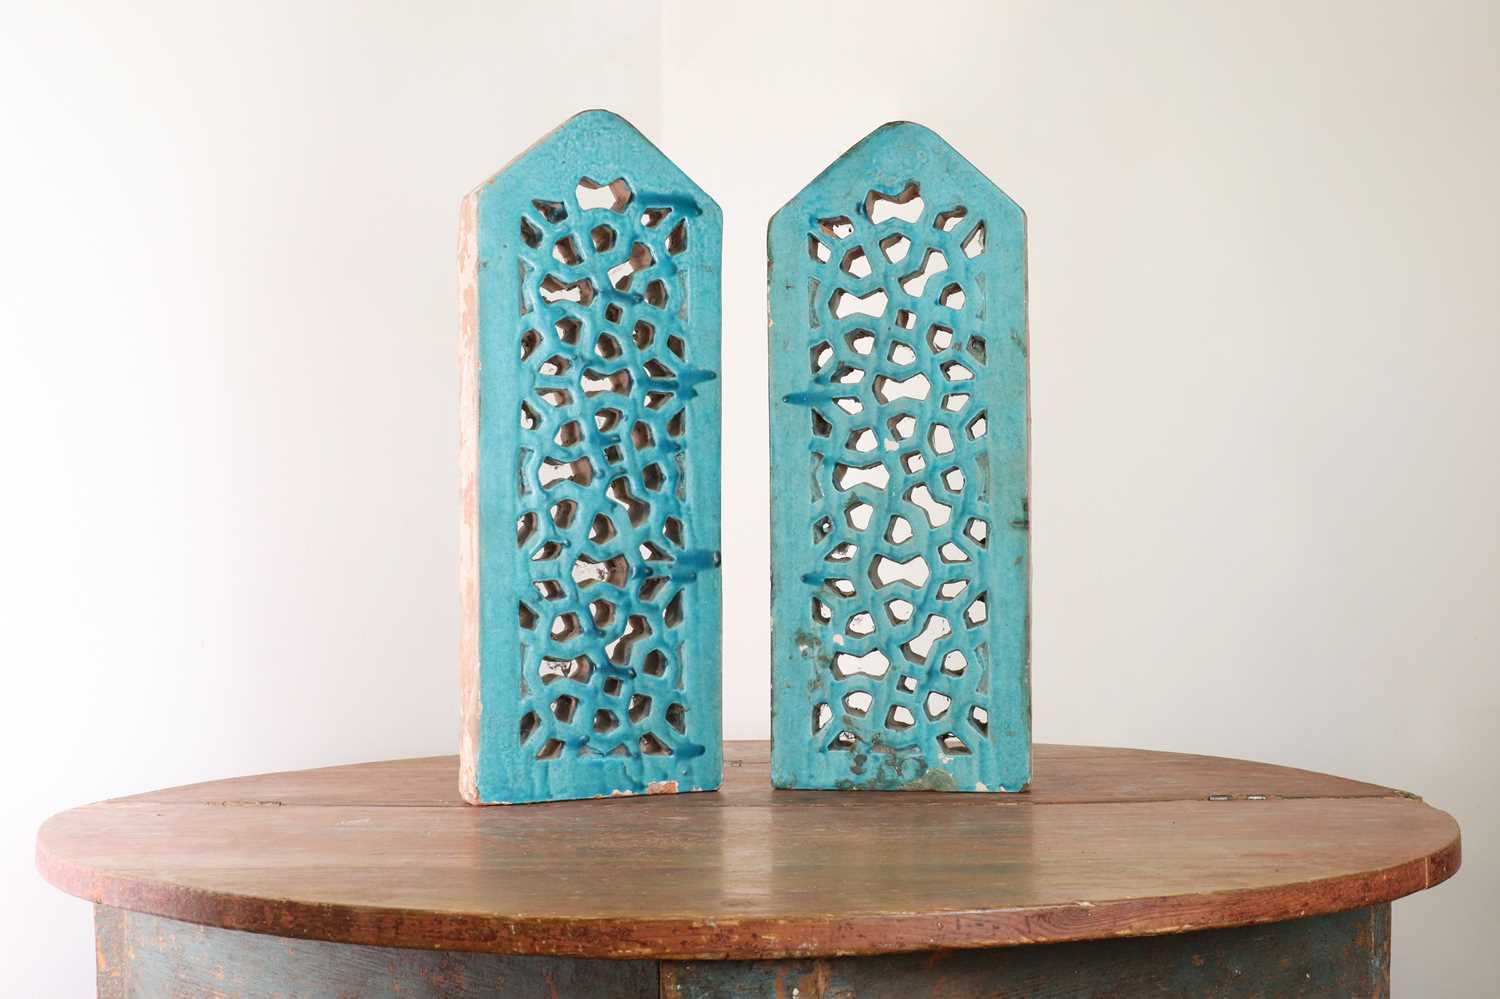 Lot 92 - A pair of Mughal stone jali panels